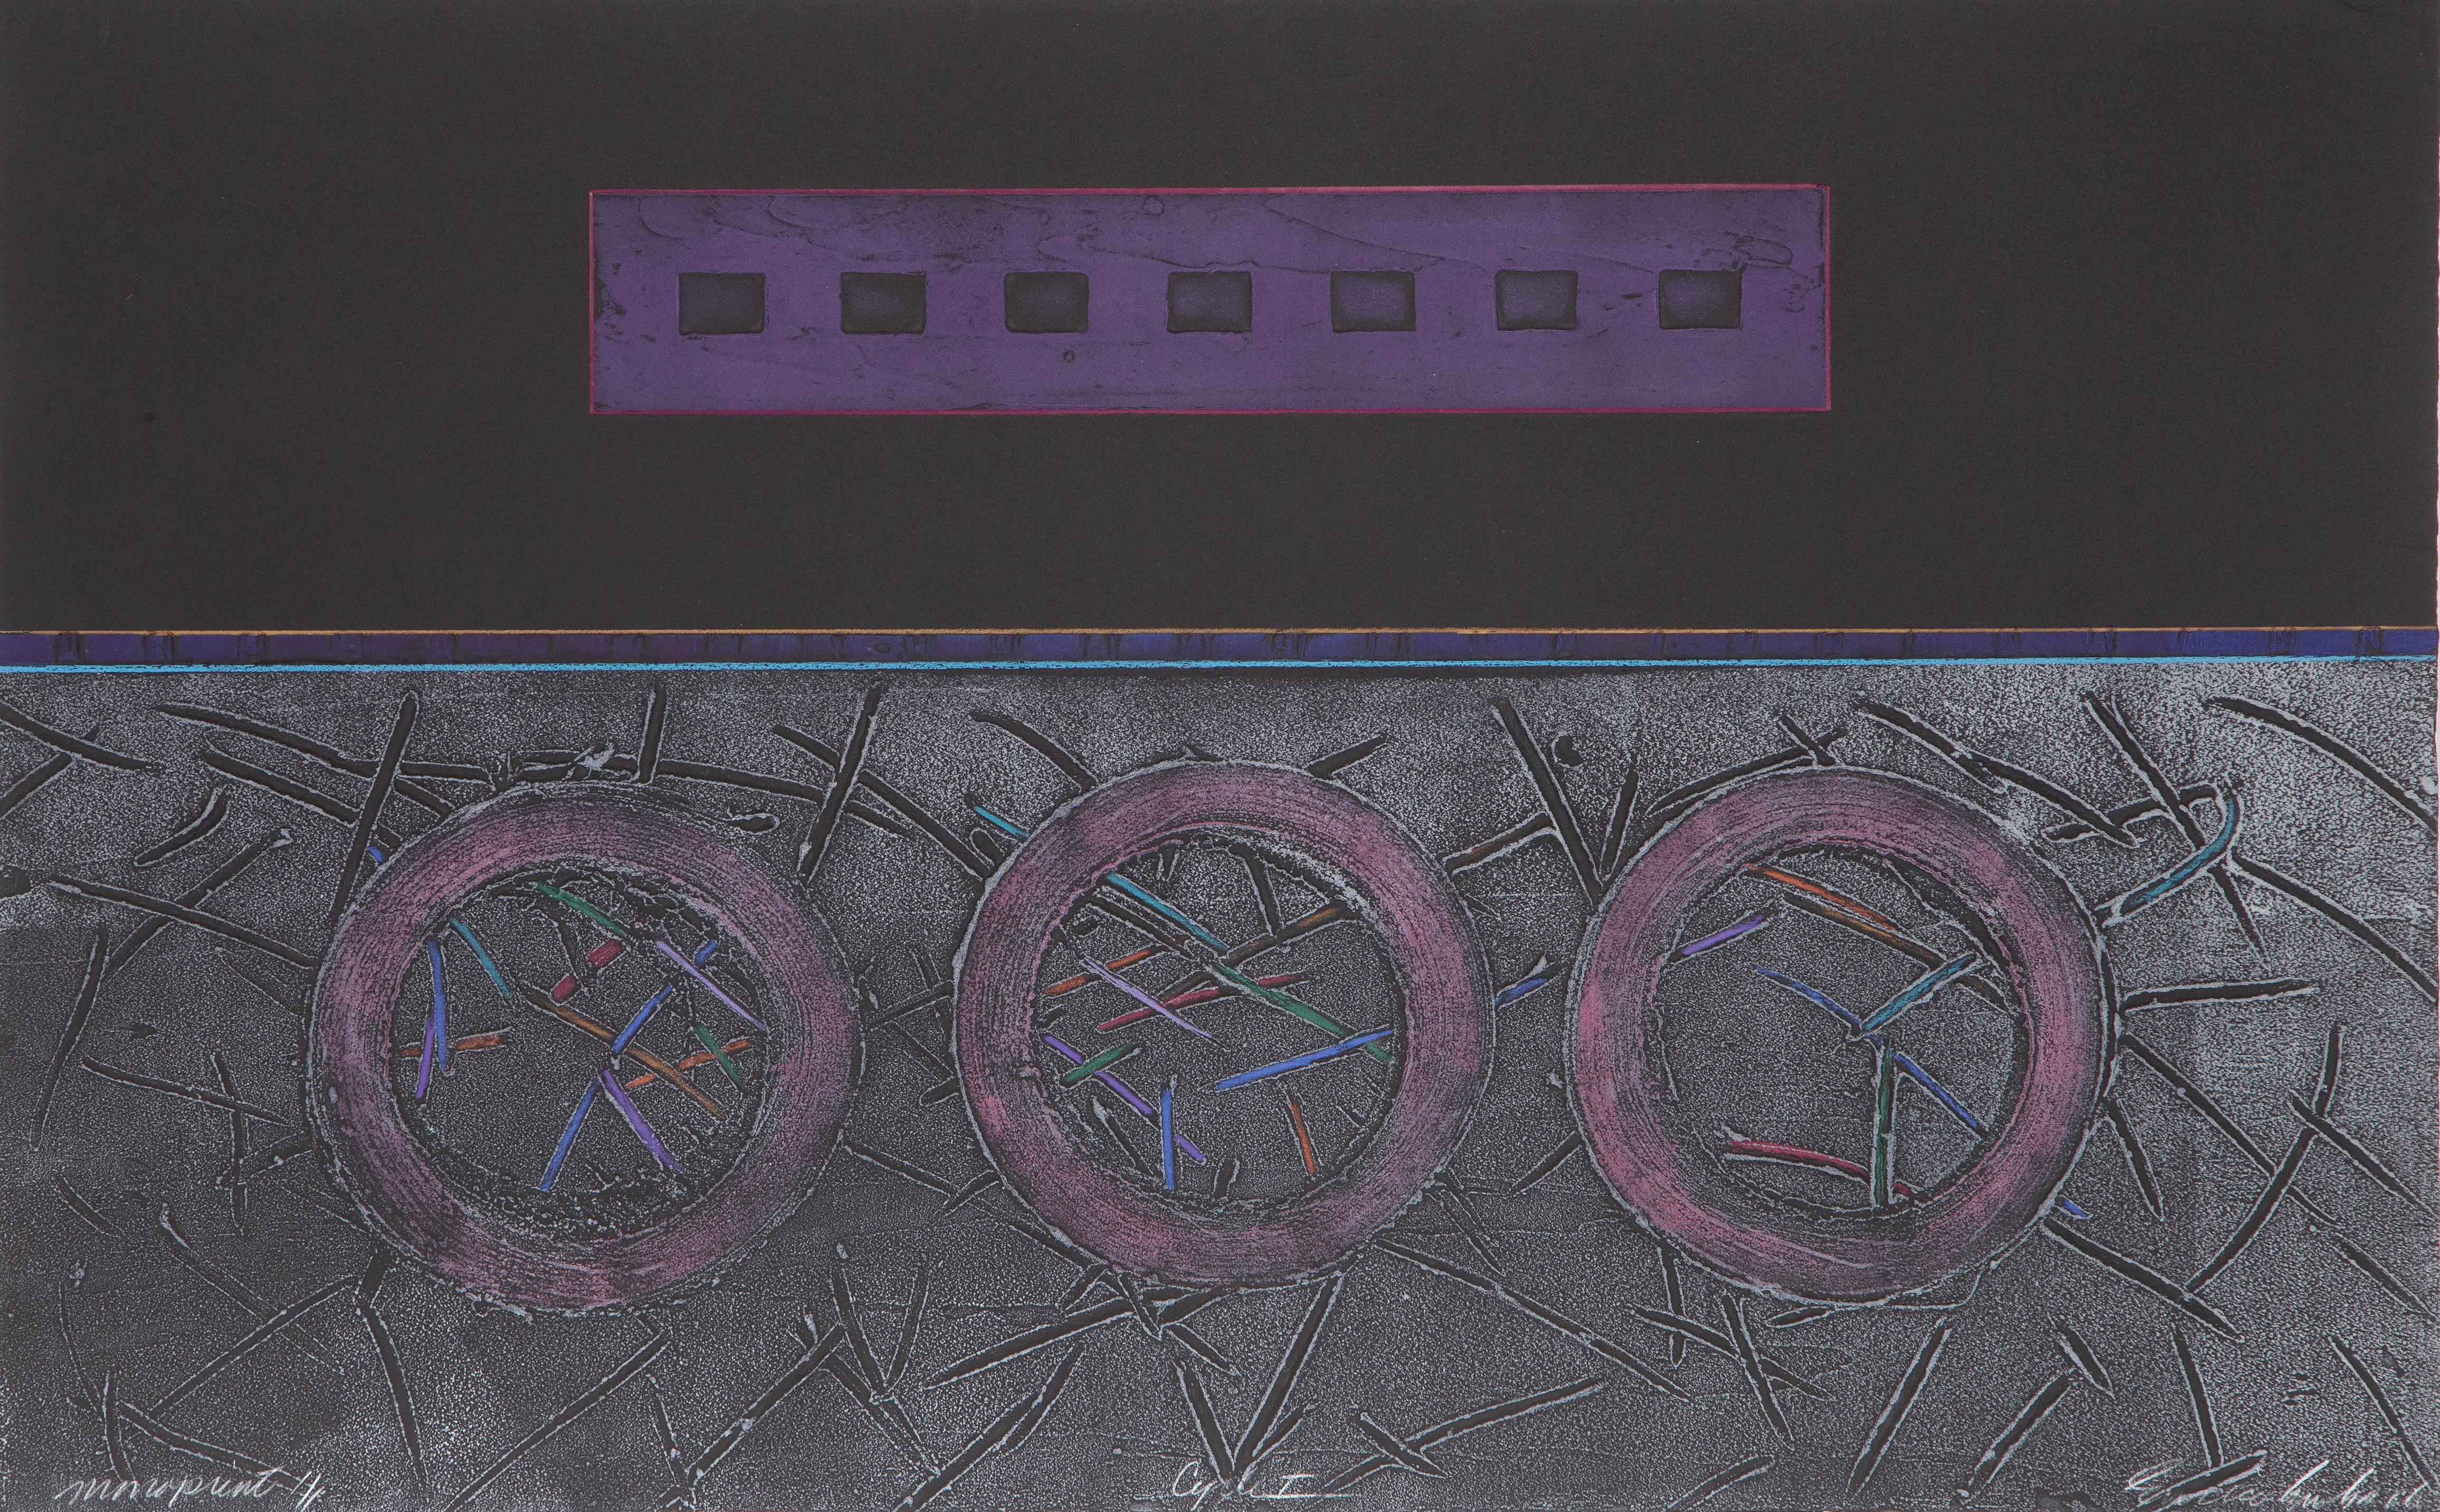 Cycle I
Enrico Embroli, American (1945)
Monoprint, signed, titled and numbered in pencil
Size: 24 x 38 in. (60.96 x 96.52 cm)